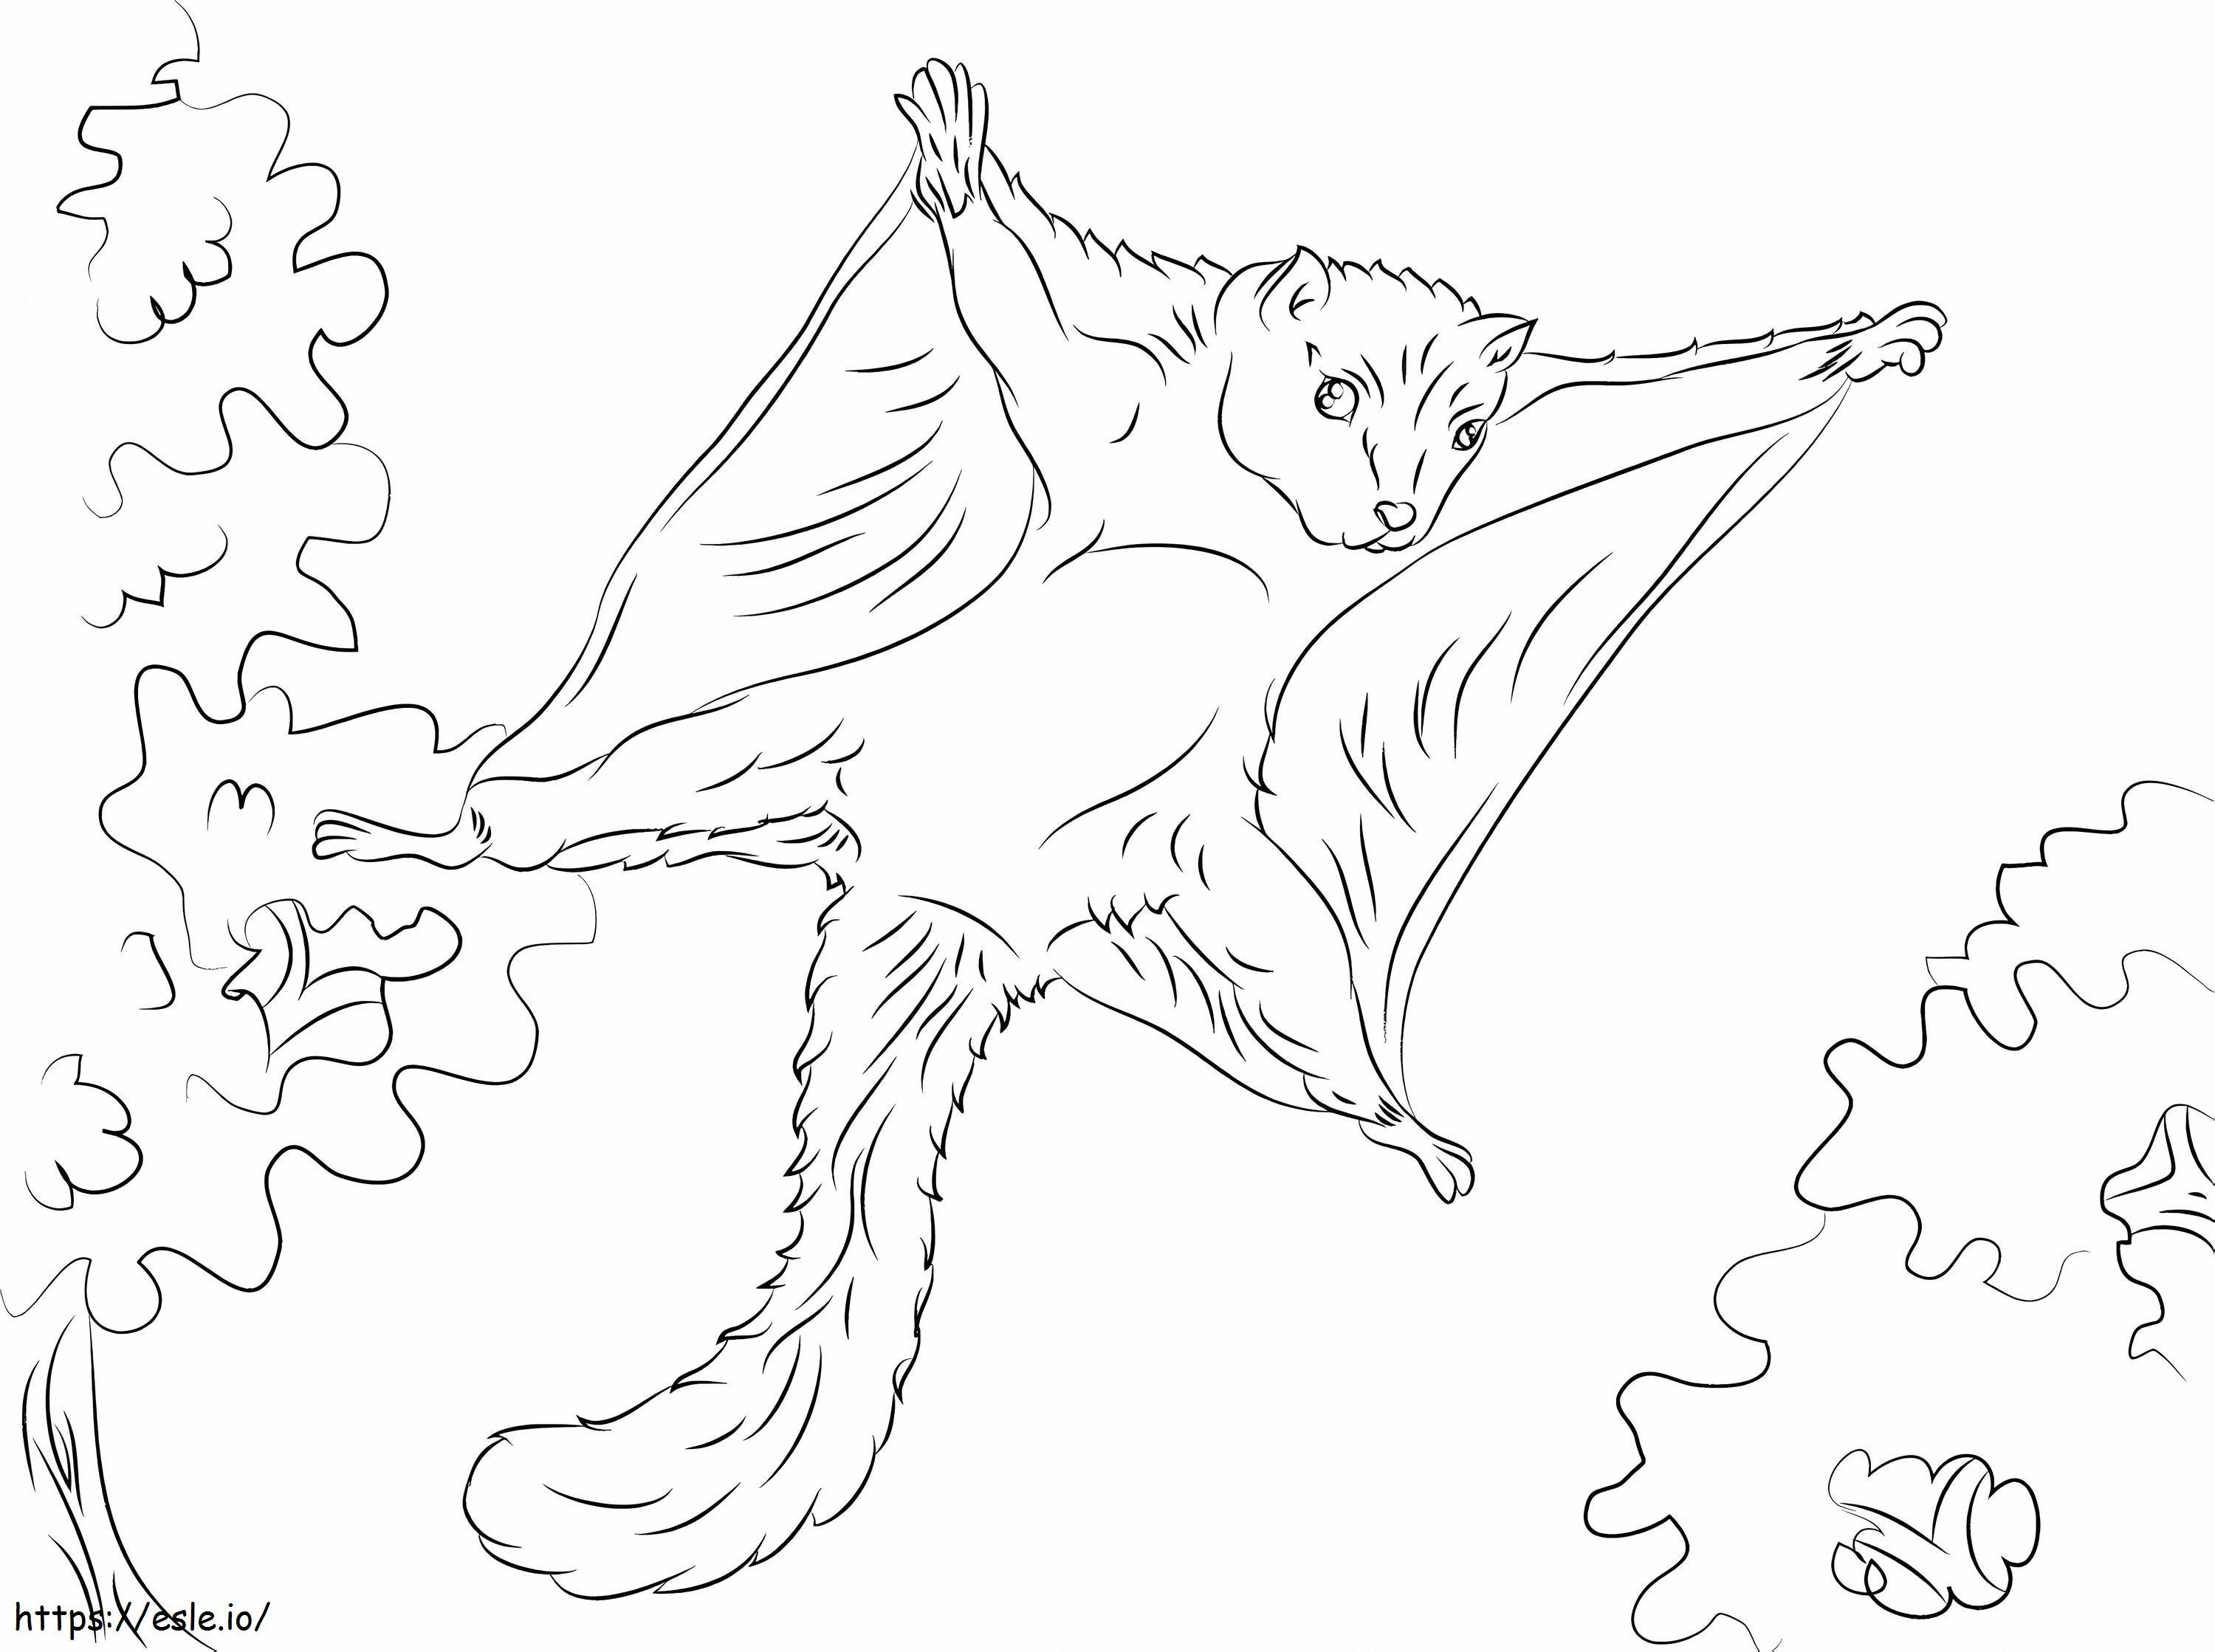 Cute Squirels For Kids With Cute Flying Squirrel Free Printable 3 coloring page